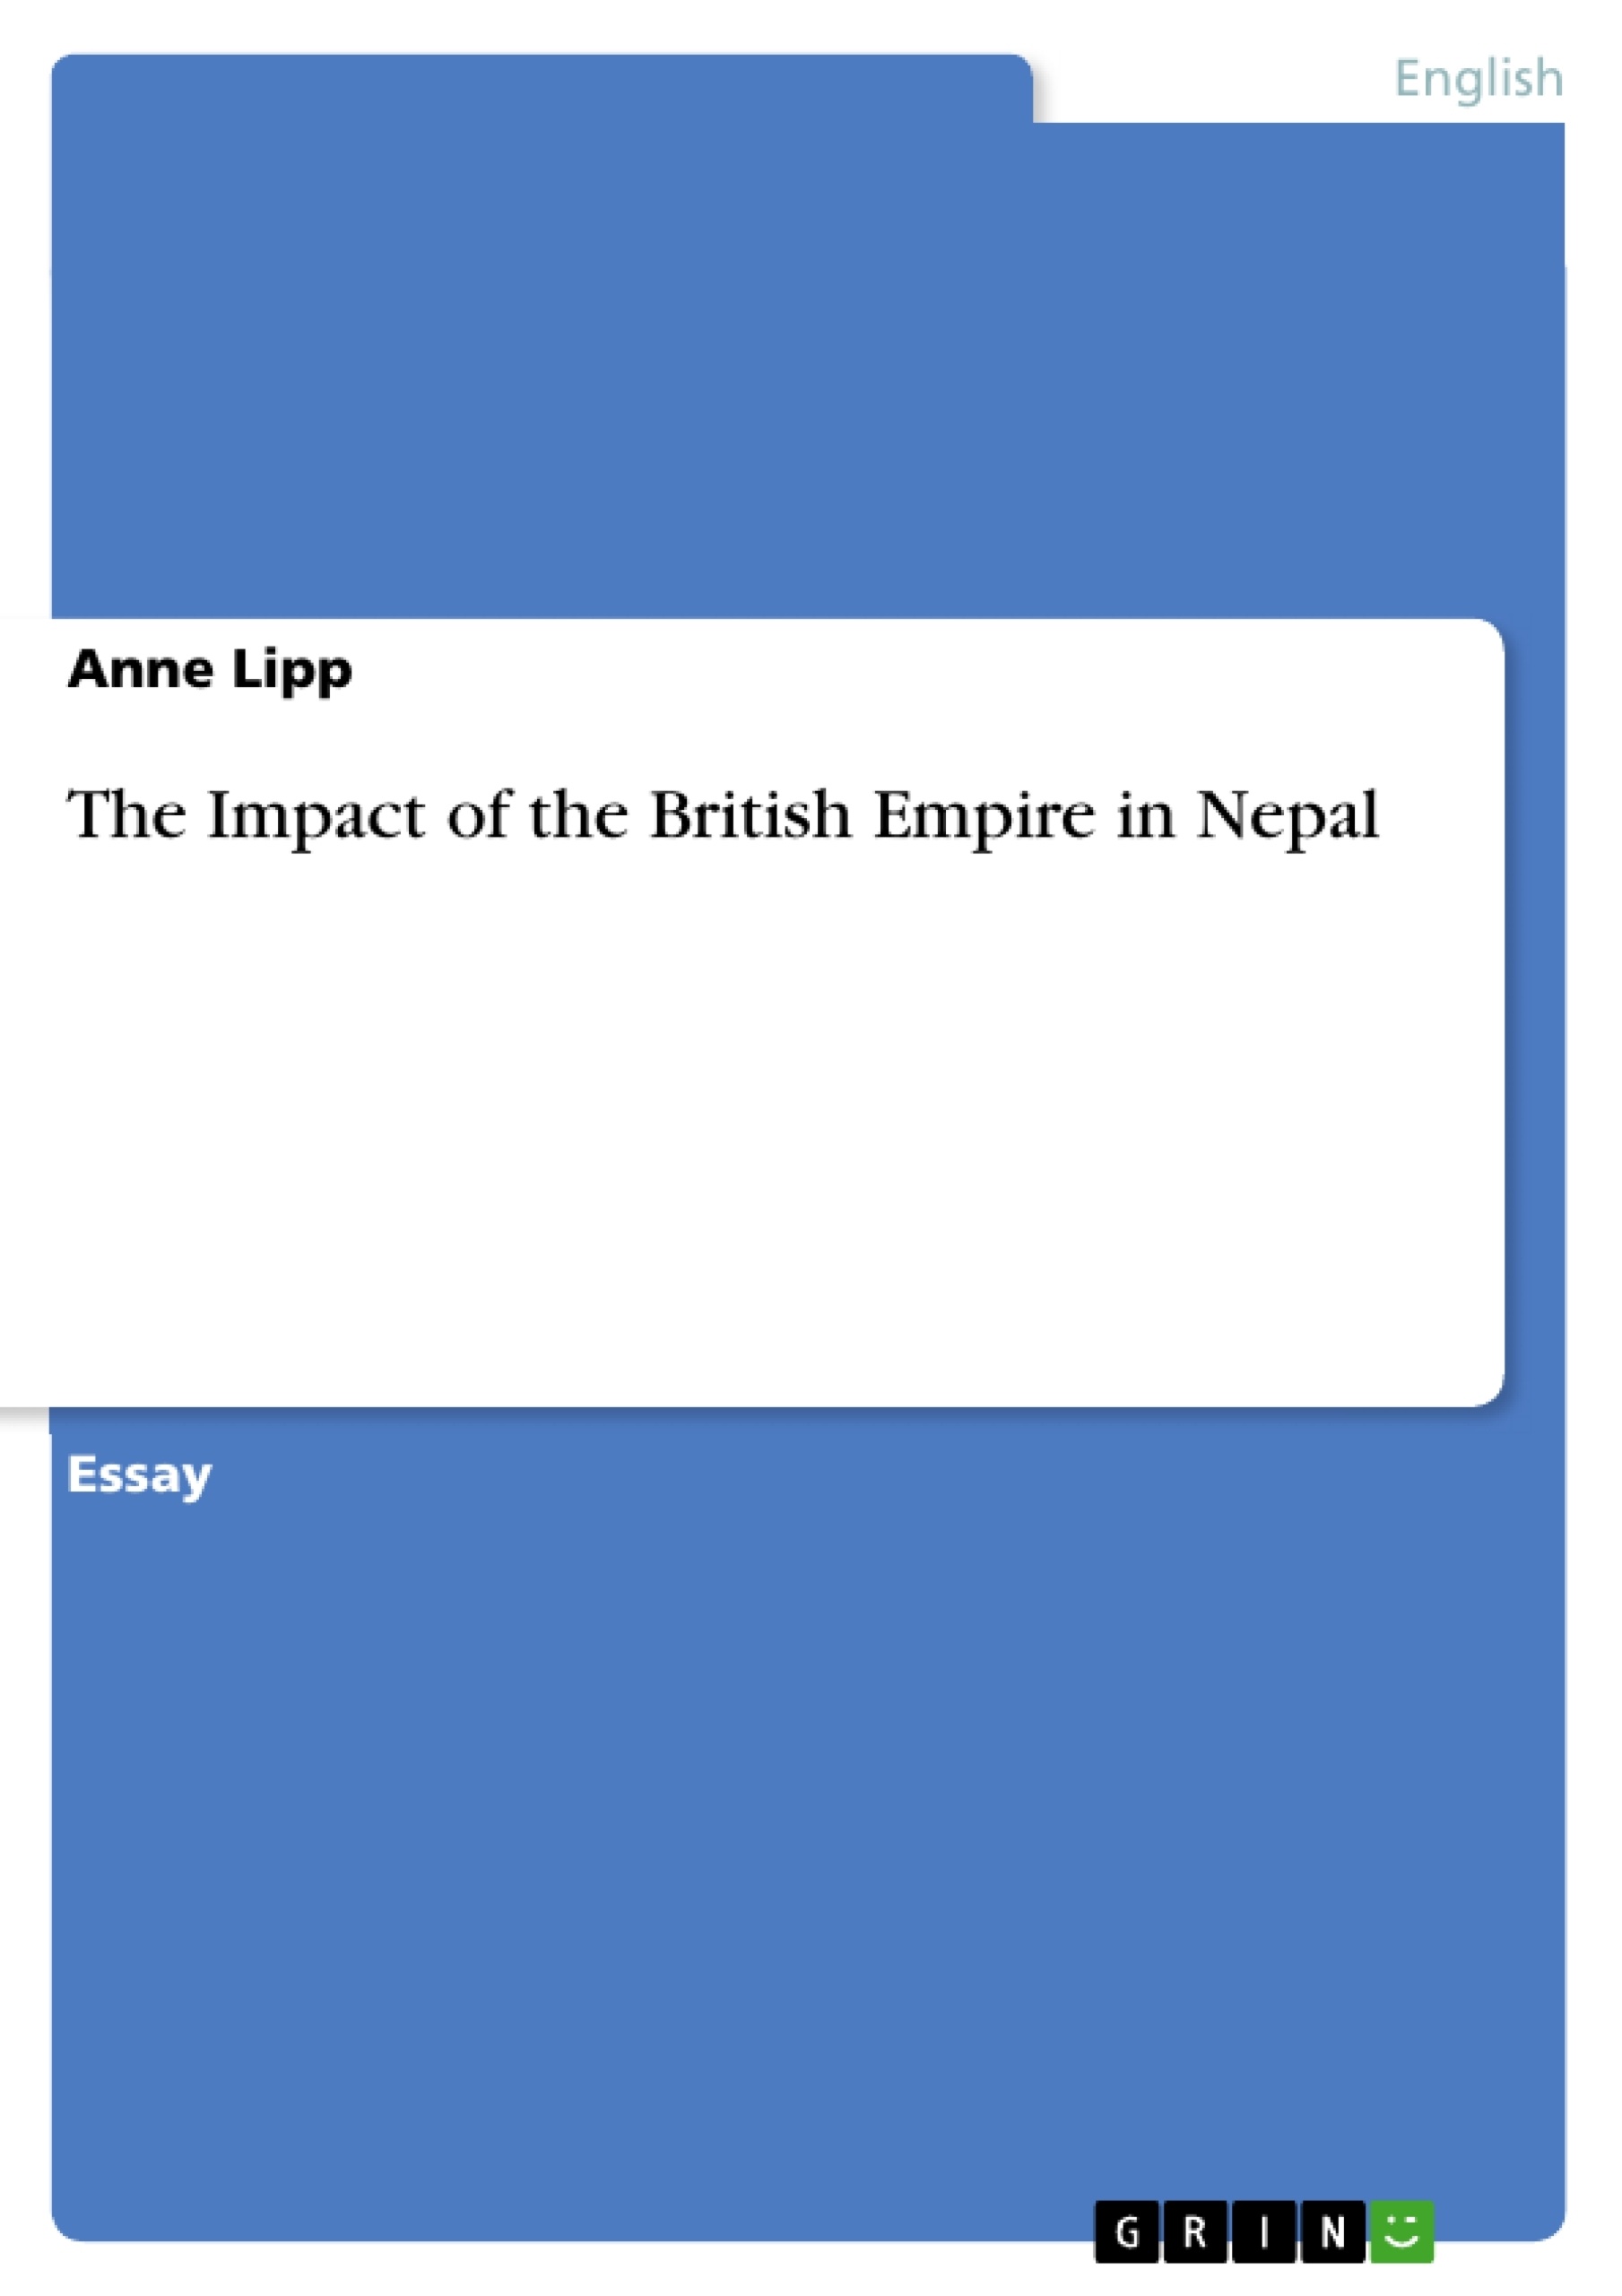 Title: The Impact of the British Empire in Nepal